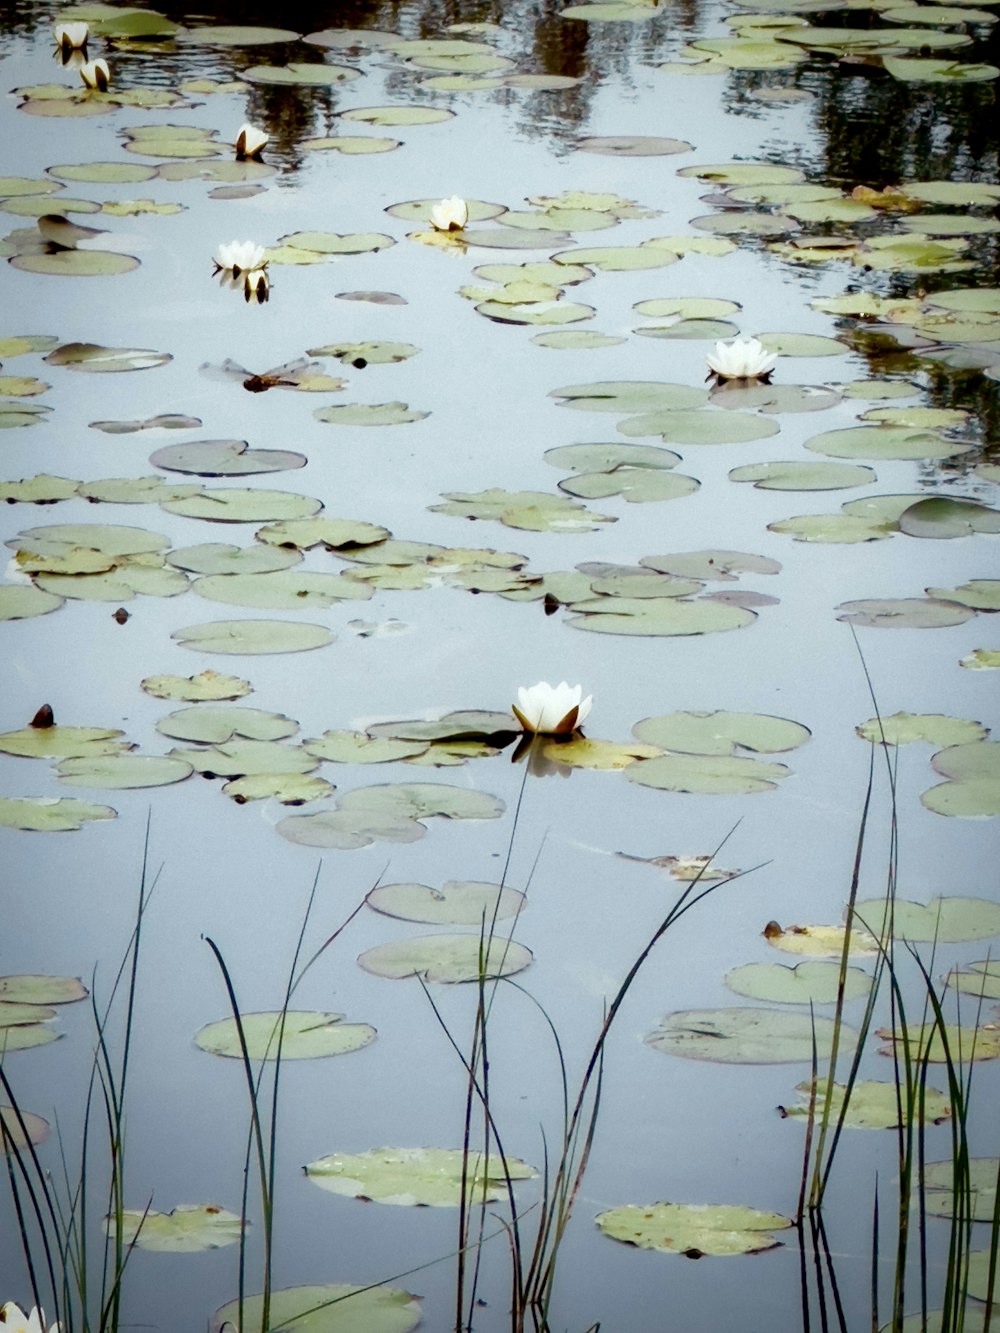 water lilies are floating on the surface of a pond